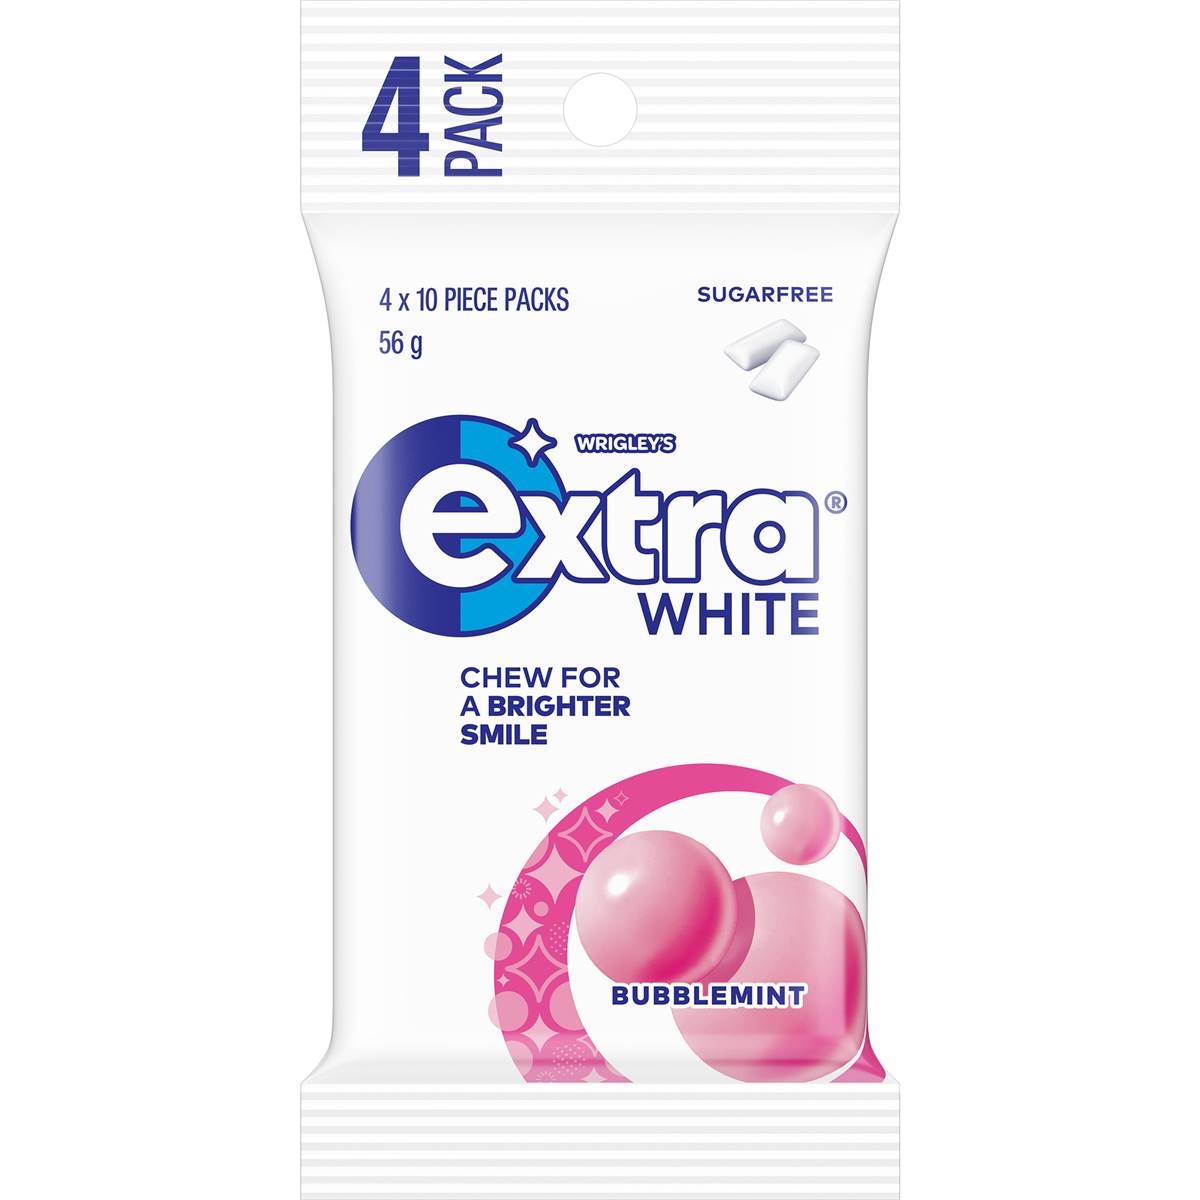 Extra White Bubblemint Chewing Gum Sugar Free 4x10 Piece